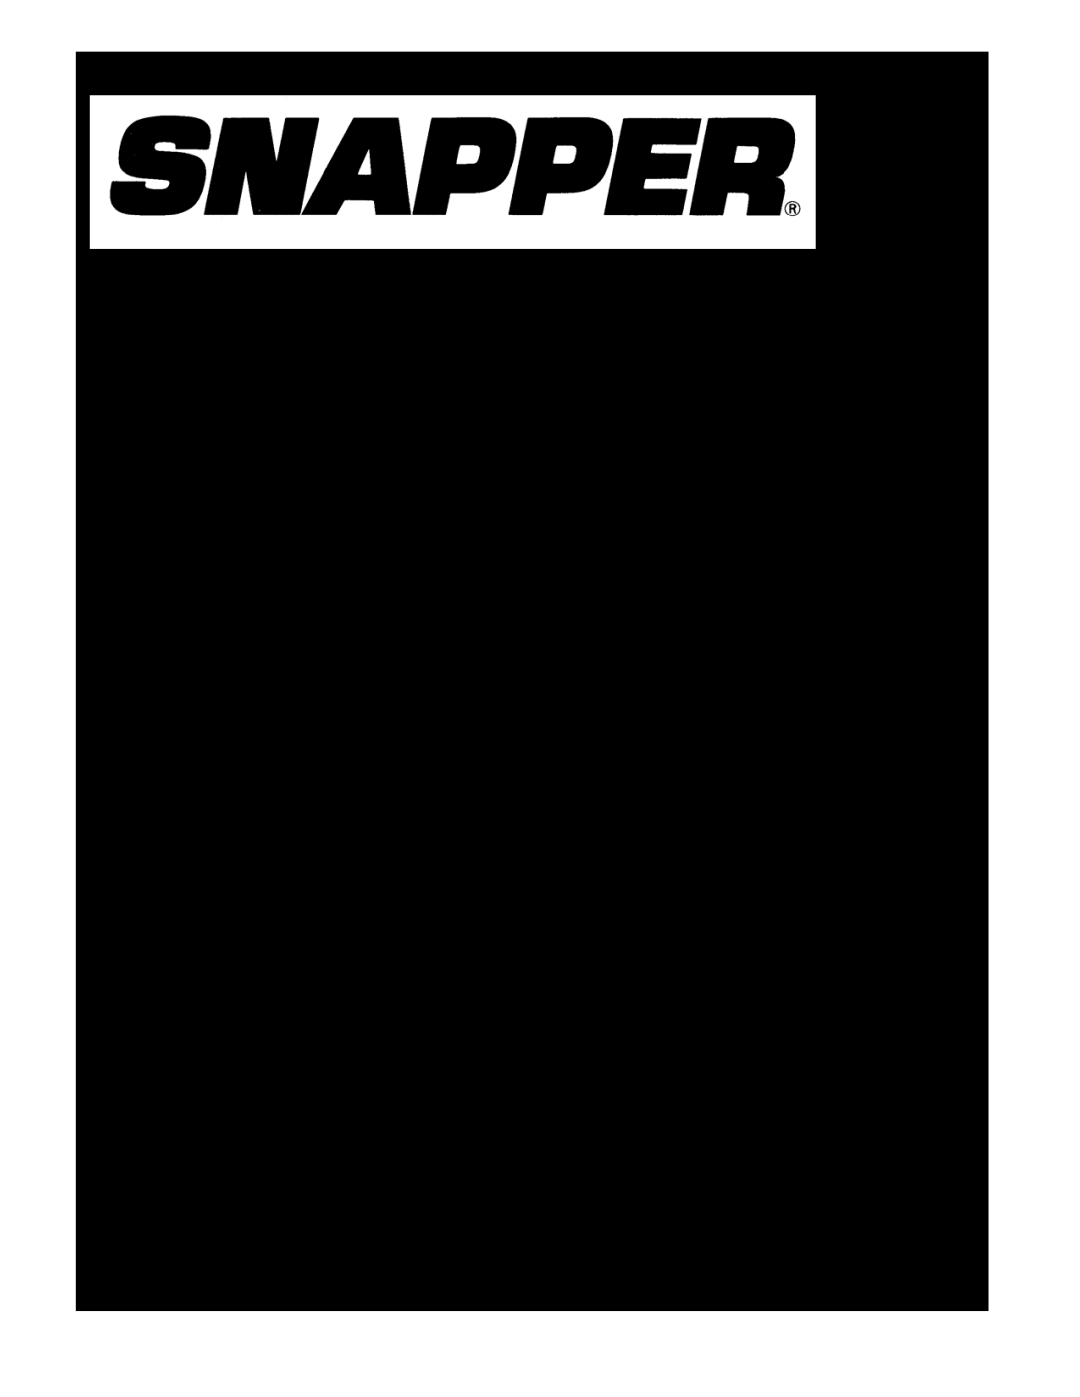 Snapper 7084941 Reproduction, Standard Deck Rear Engine Rider Series, Parts Manual for, 7006278, Revision B, 4/21/2010 